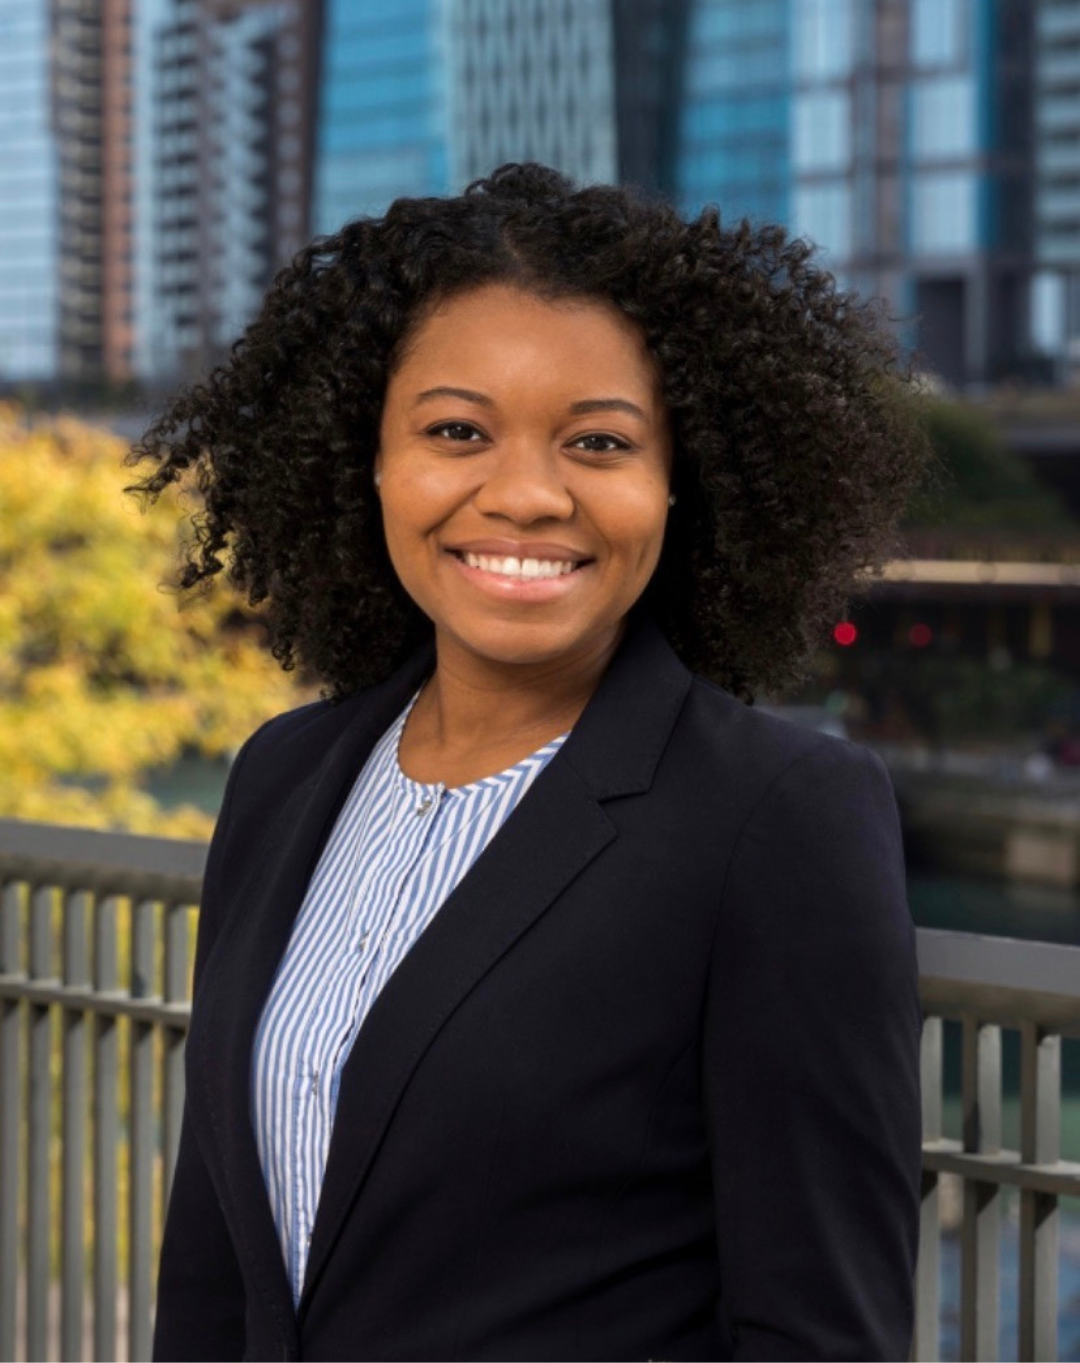 Chicago Booth Graduate Set to Make a Difference in Marketing